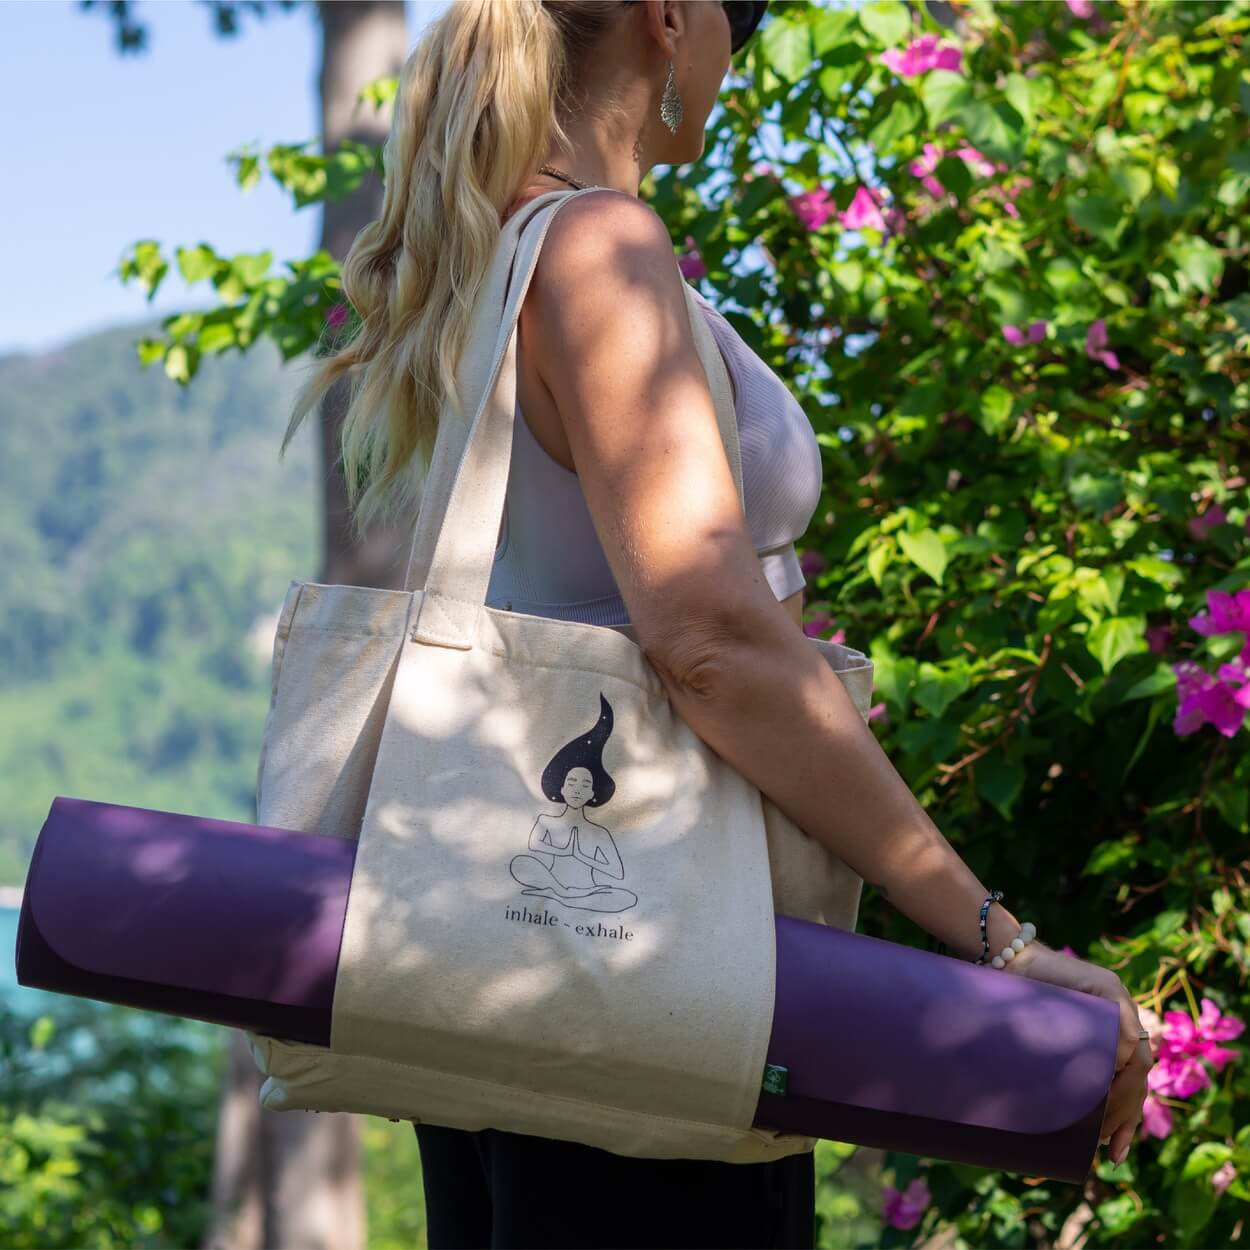 Yoga bag for yoga mat and accessories